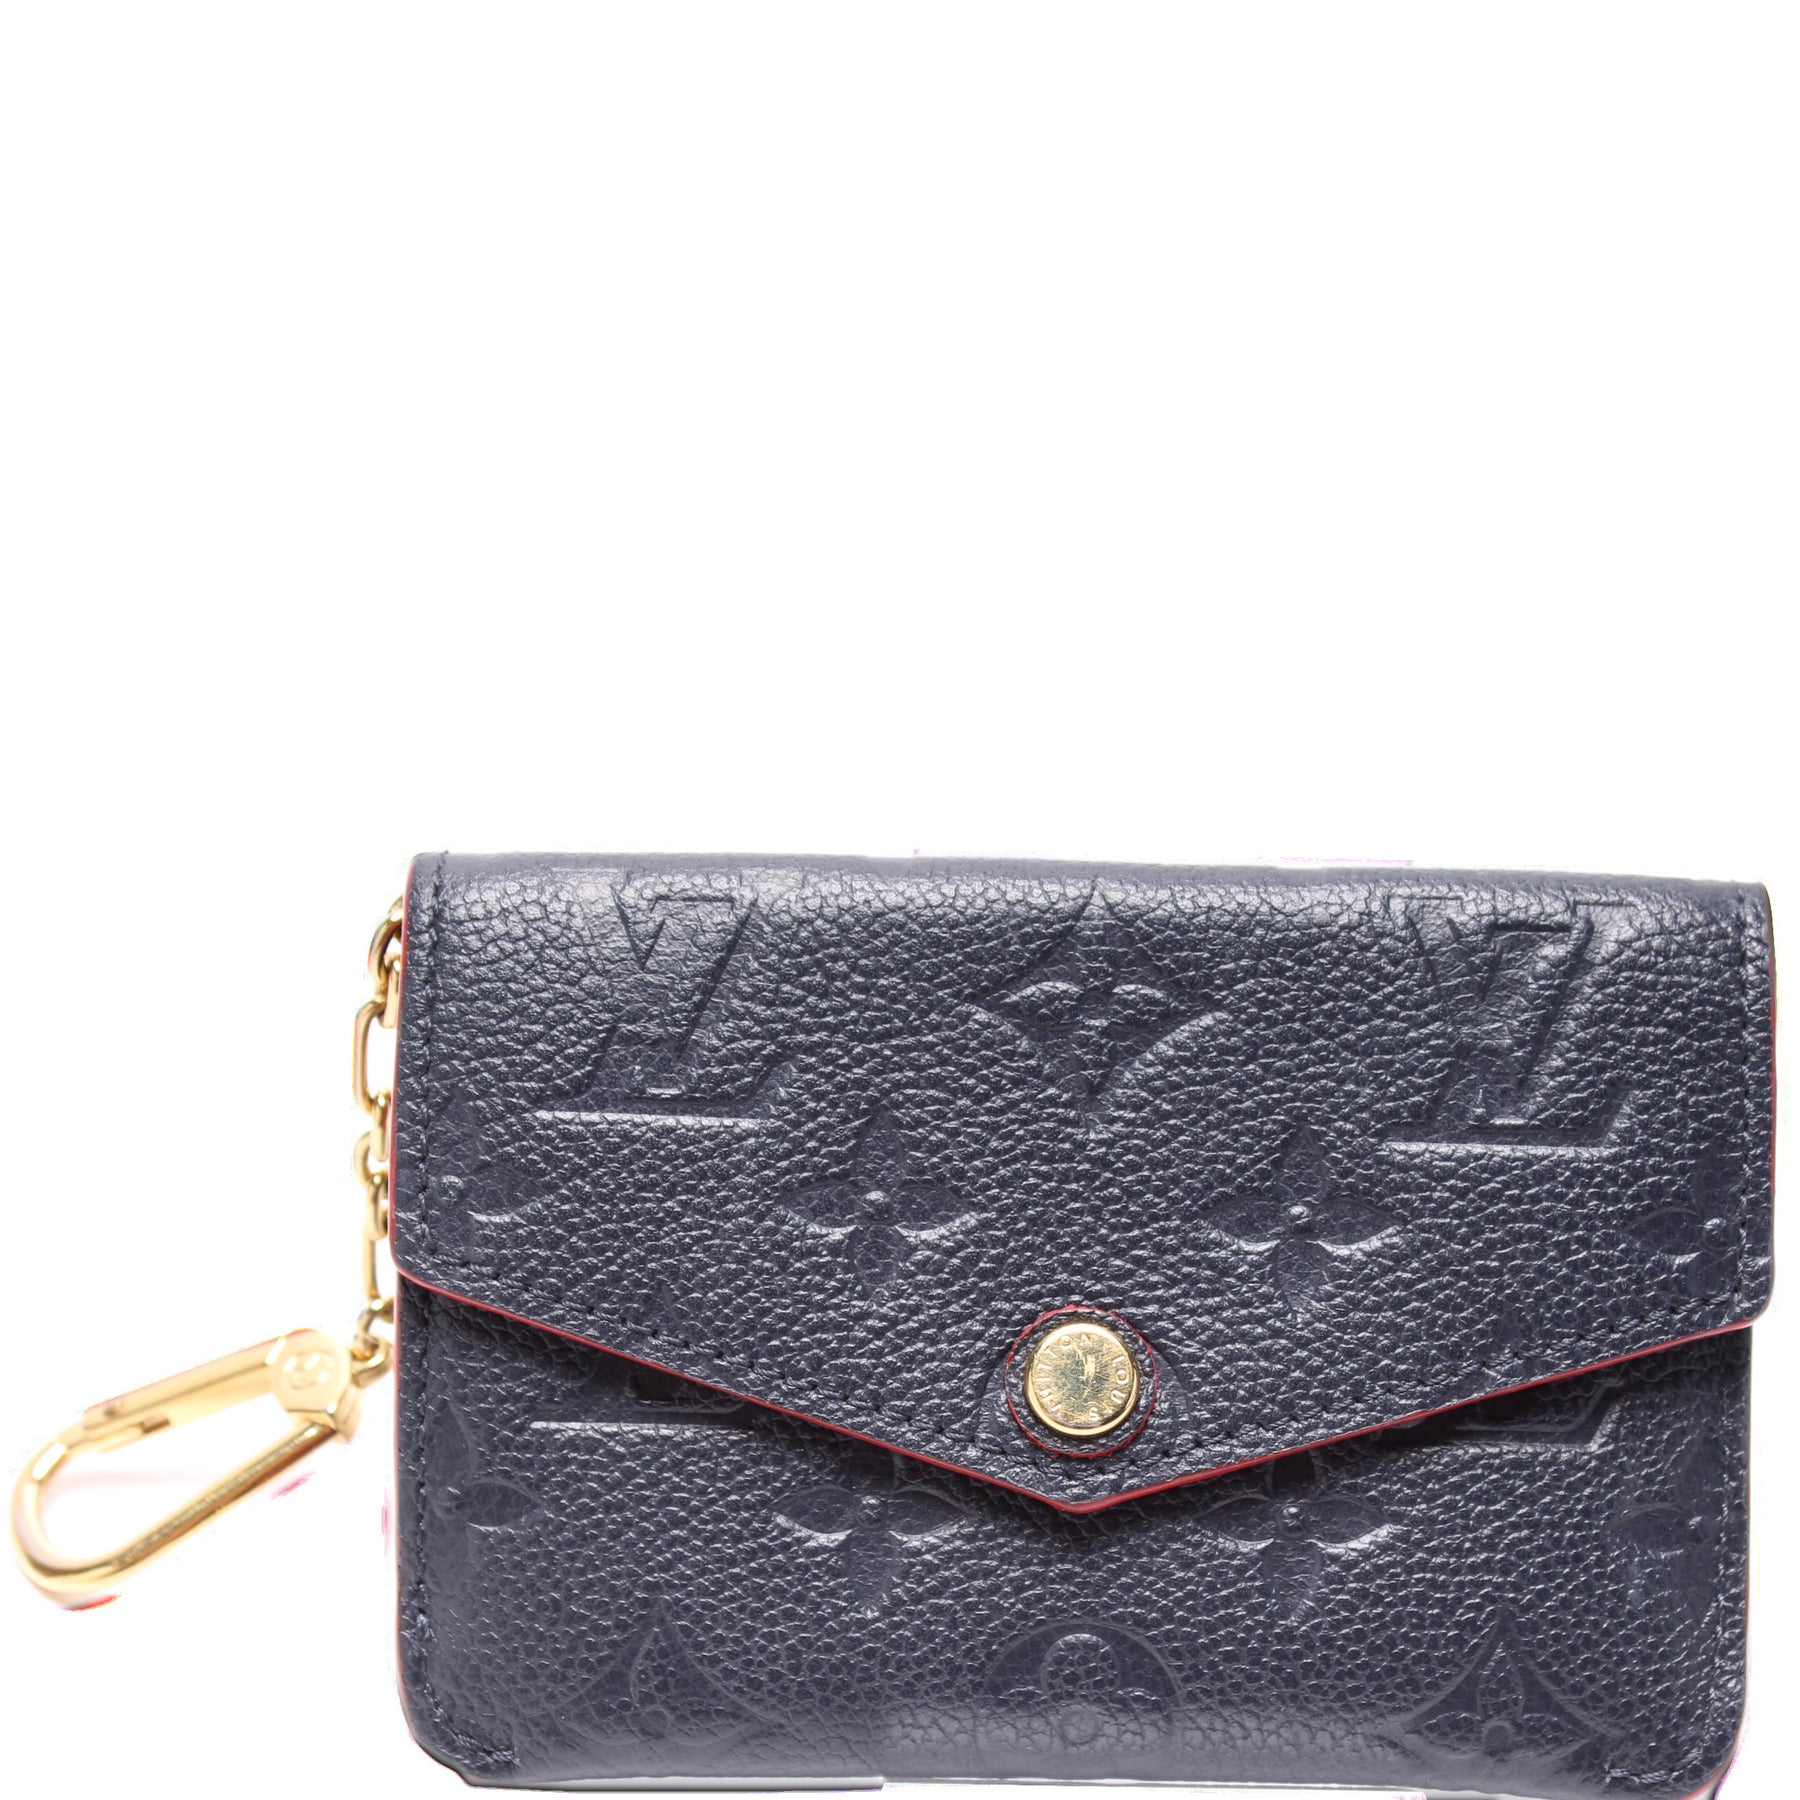 Louis Vuitton Empreinte Key Cles - What fits and Wear and Tear